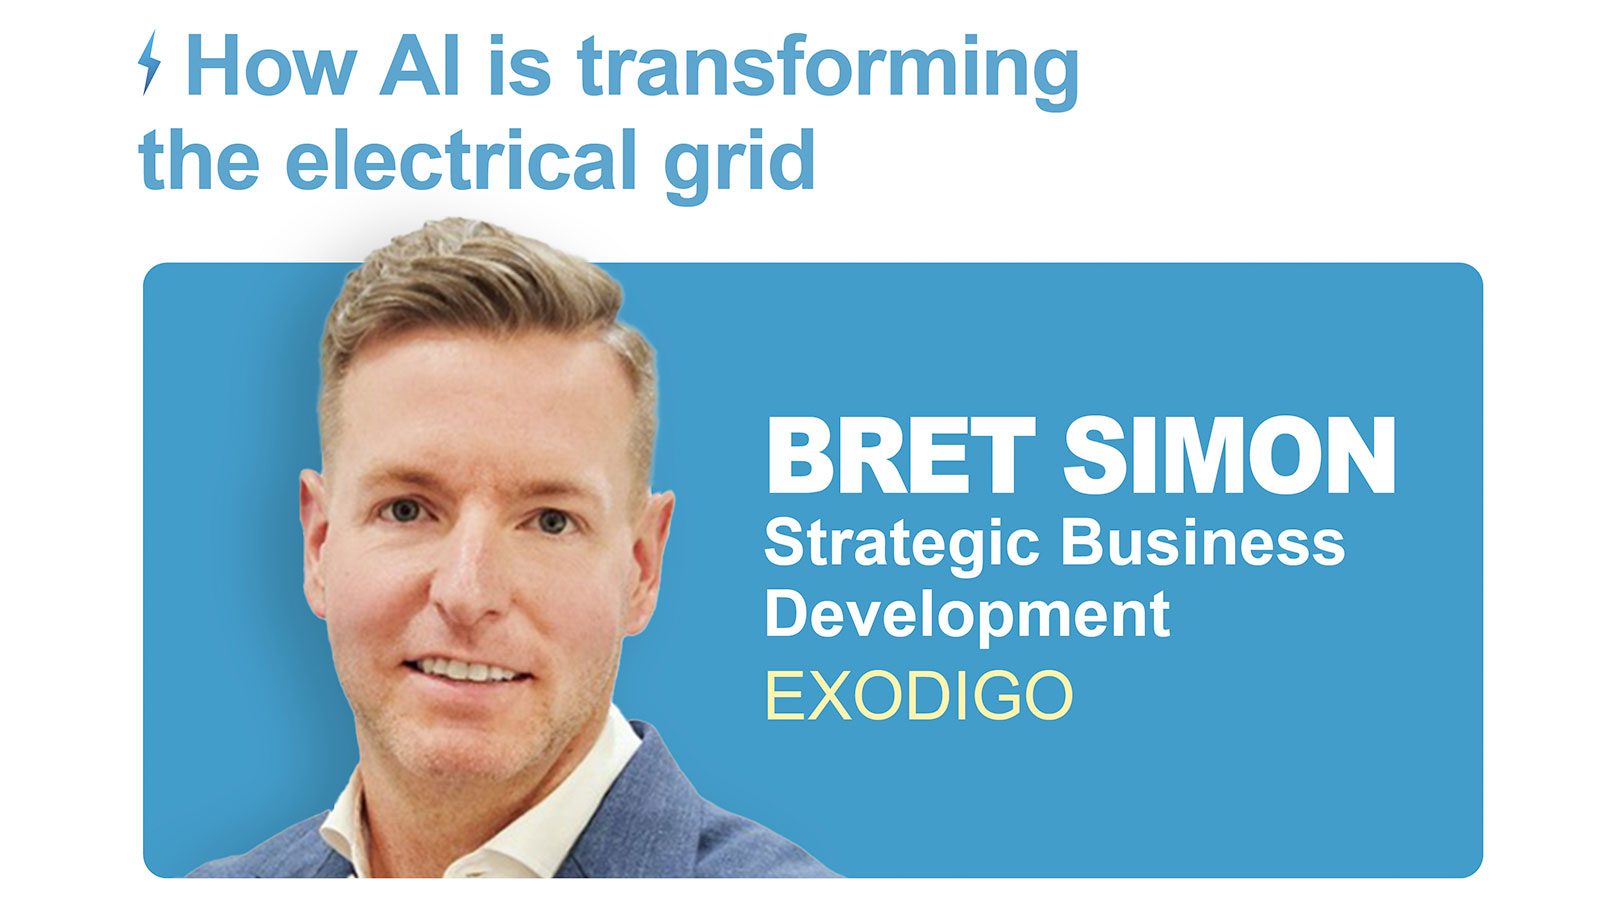 At the upcoming Powered On: Engineering a Sustainable Future event, Bret Simon from Exodigo will lead a session focusing on the integration of artificial intelligence (AI) into electrical grid management.